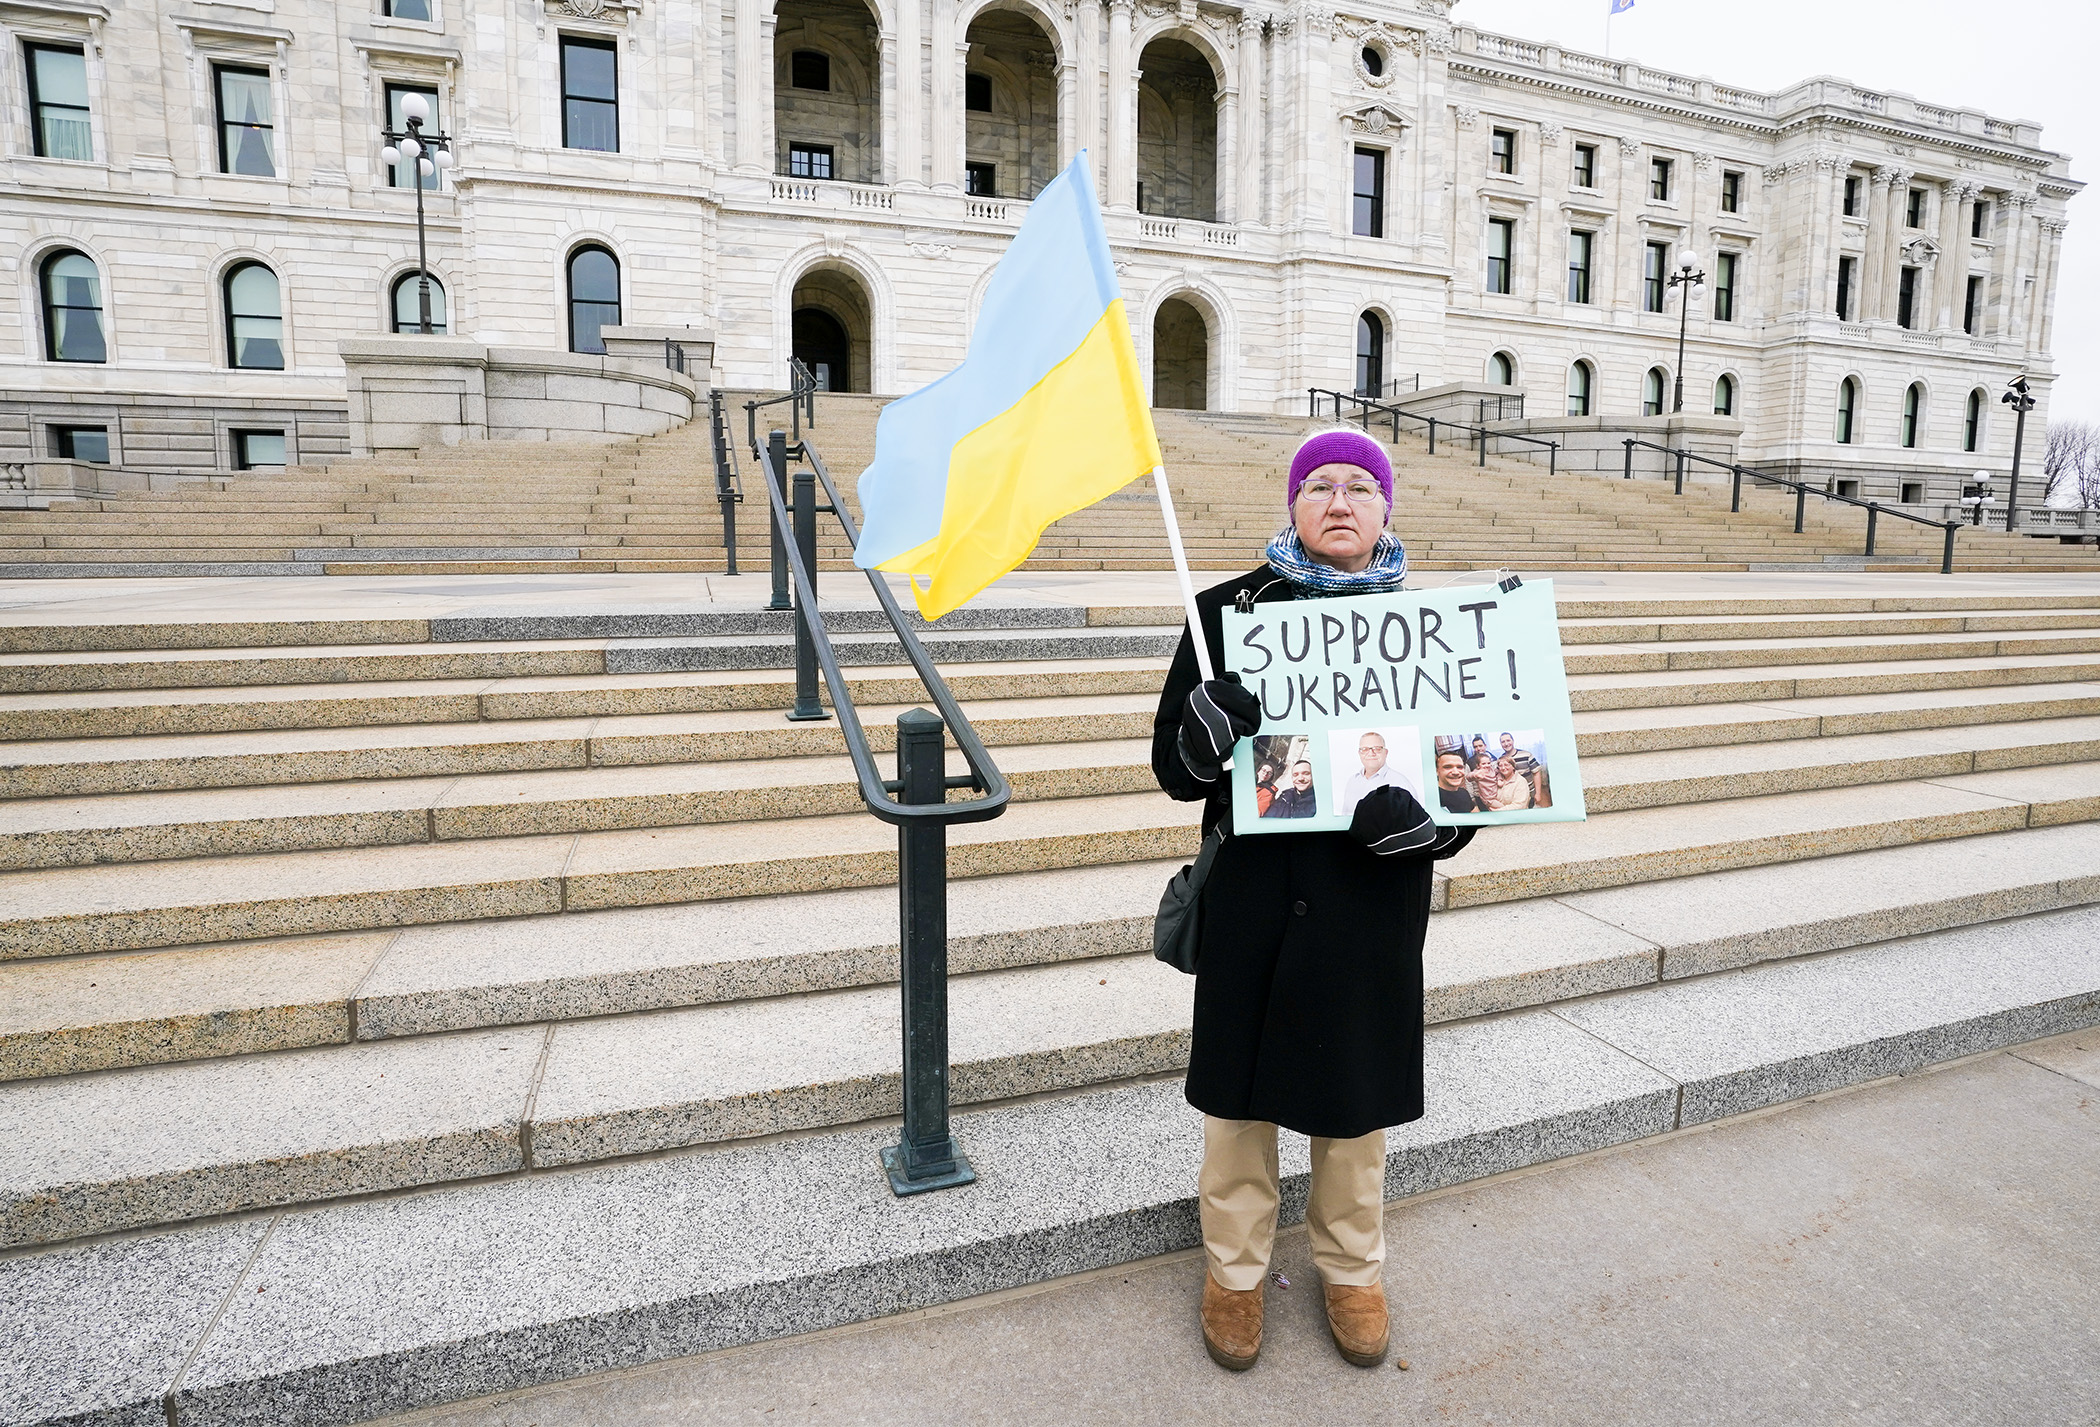 Sharon Aaseng, of Hastings, heeded Ukraine President Volodymyr Zelensky’s call for people around the world to turn out in support of Ukraine, as she parades in front of the State Capitol March 24. (Photo by Paul Battaglia)